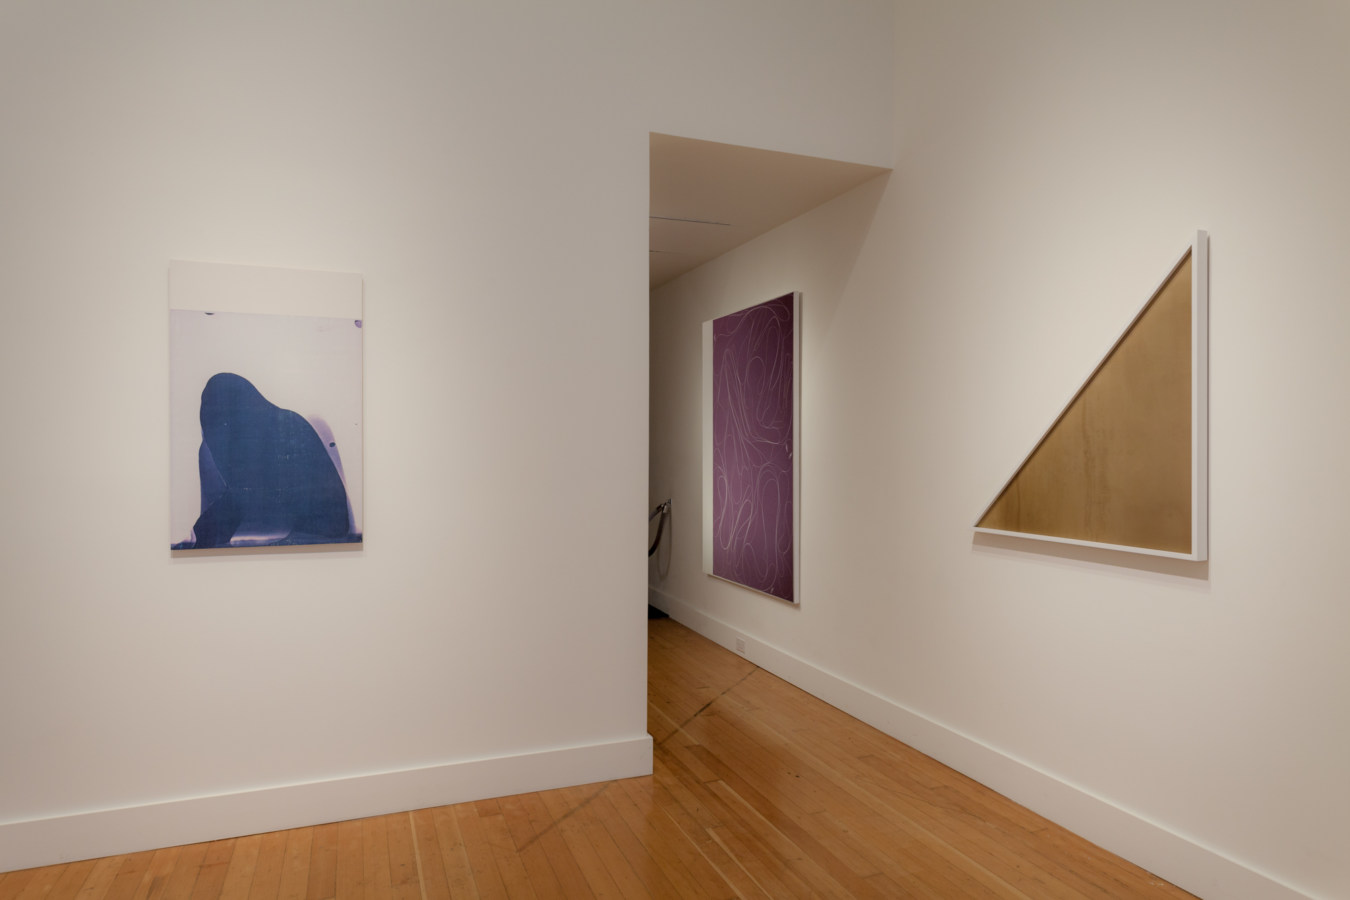 Installation photograph of a gallery space with prints and canvases on the walls